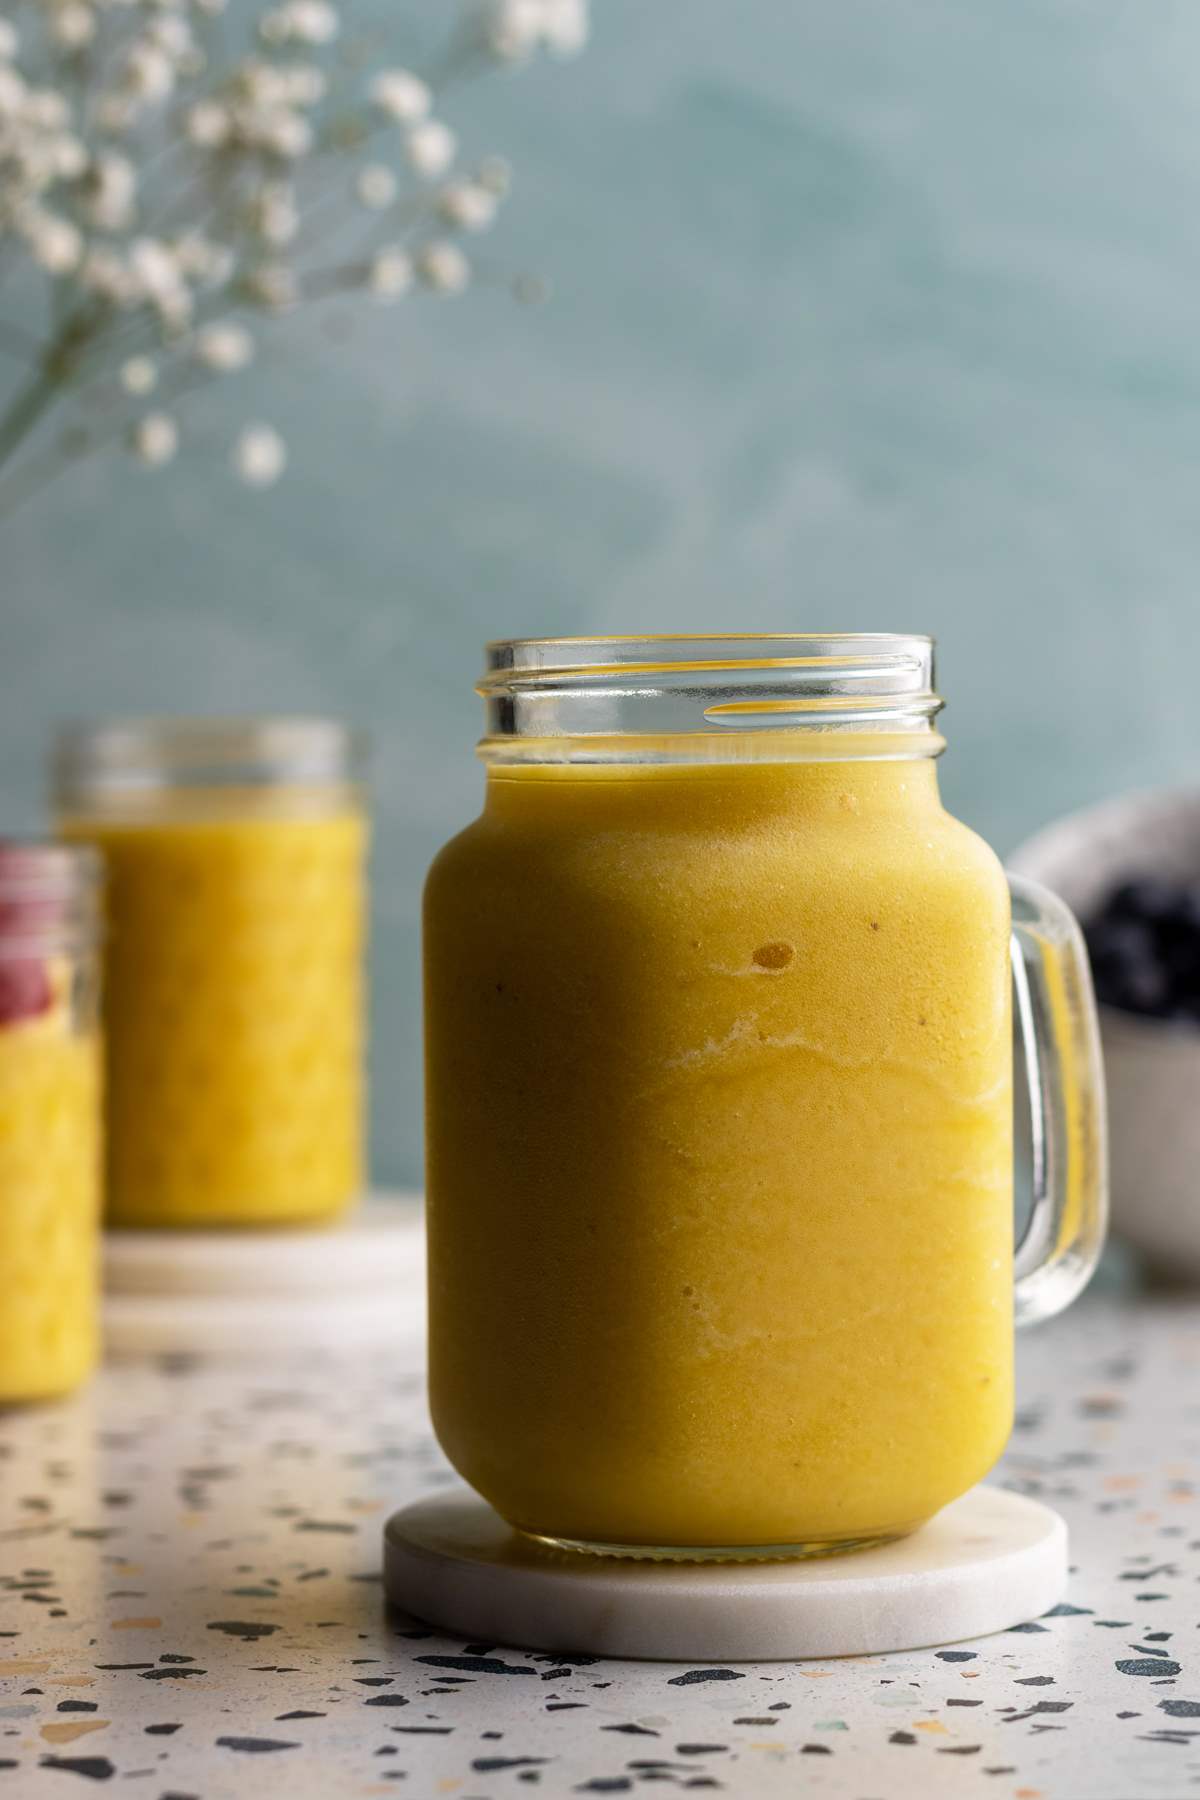 Pineapple mango smoothie in a jar on a coaster.